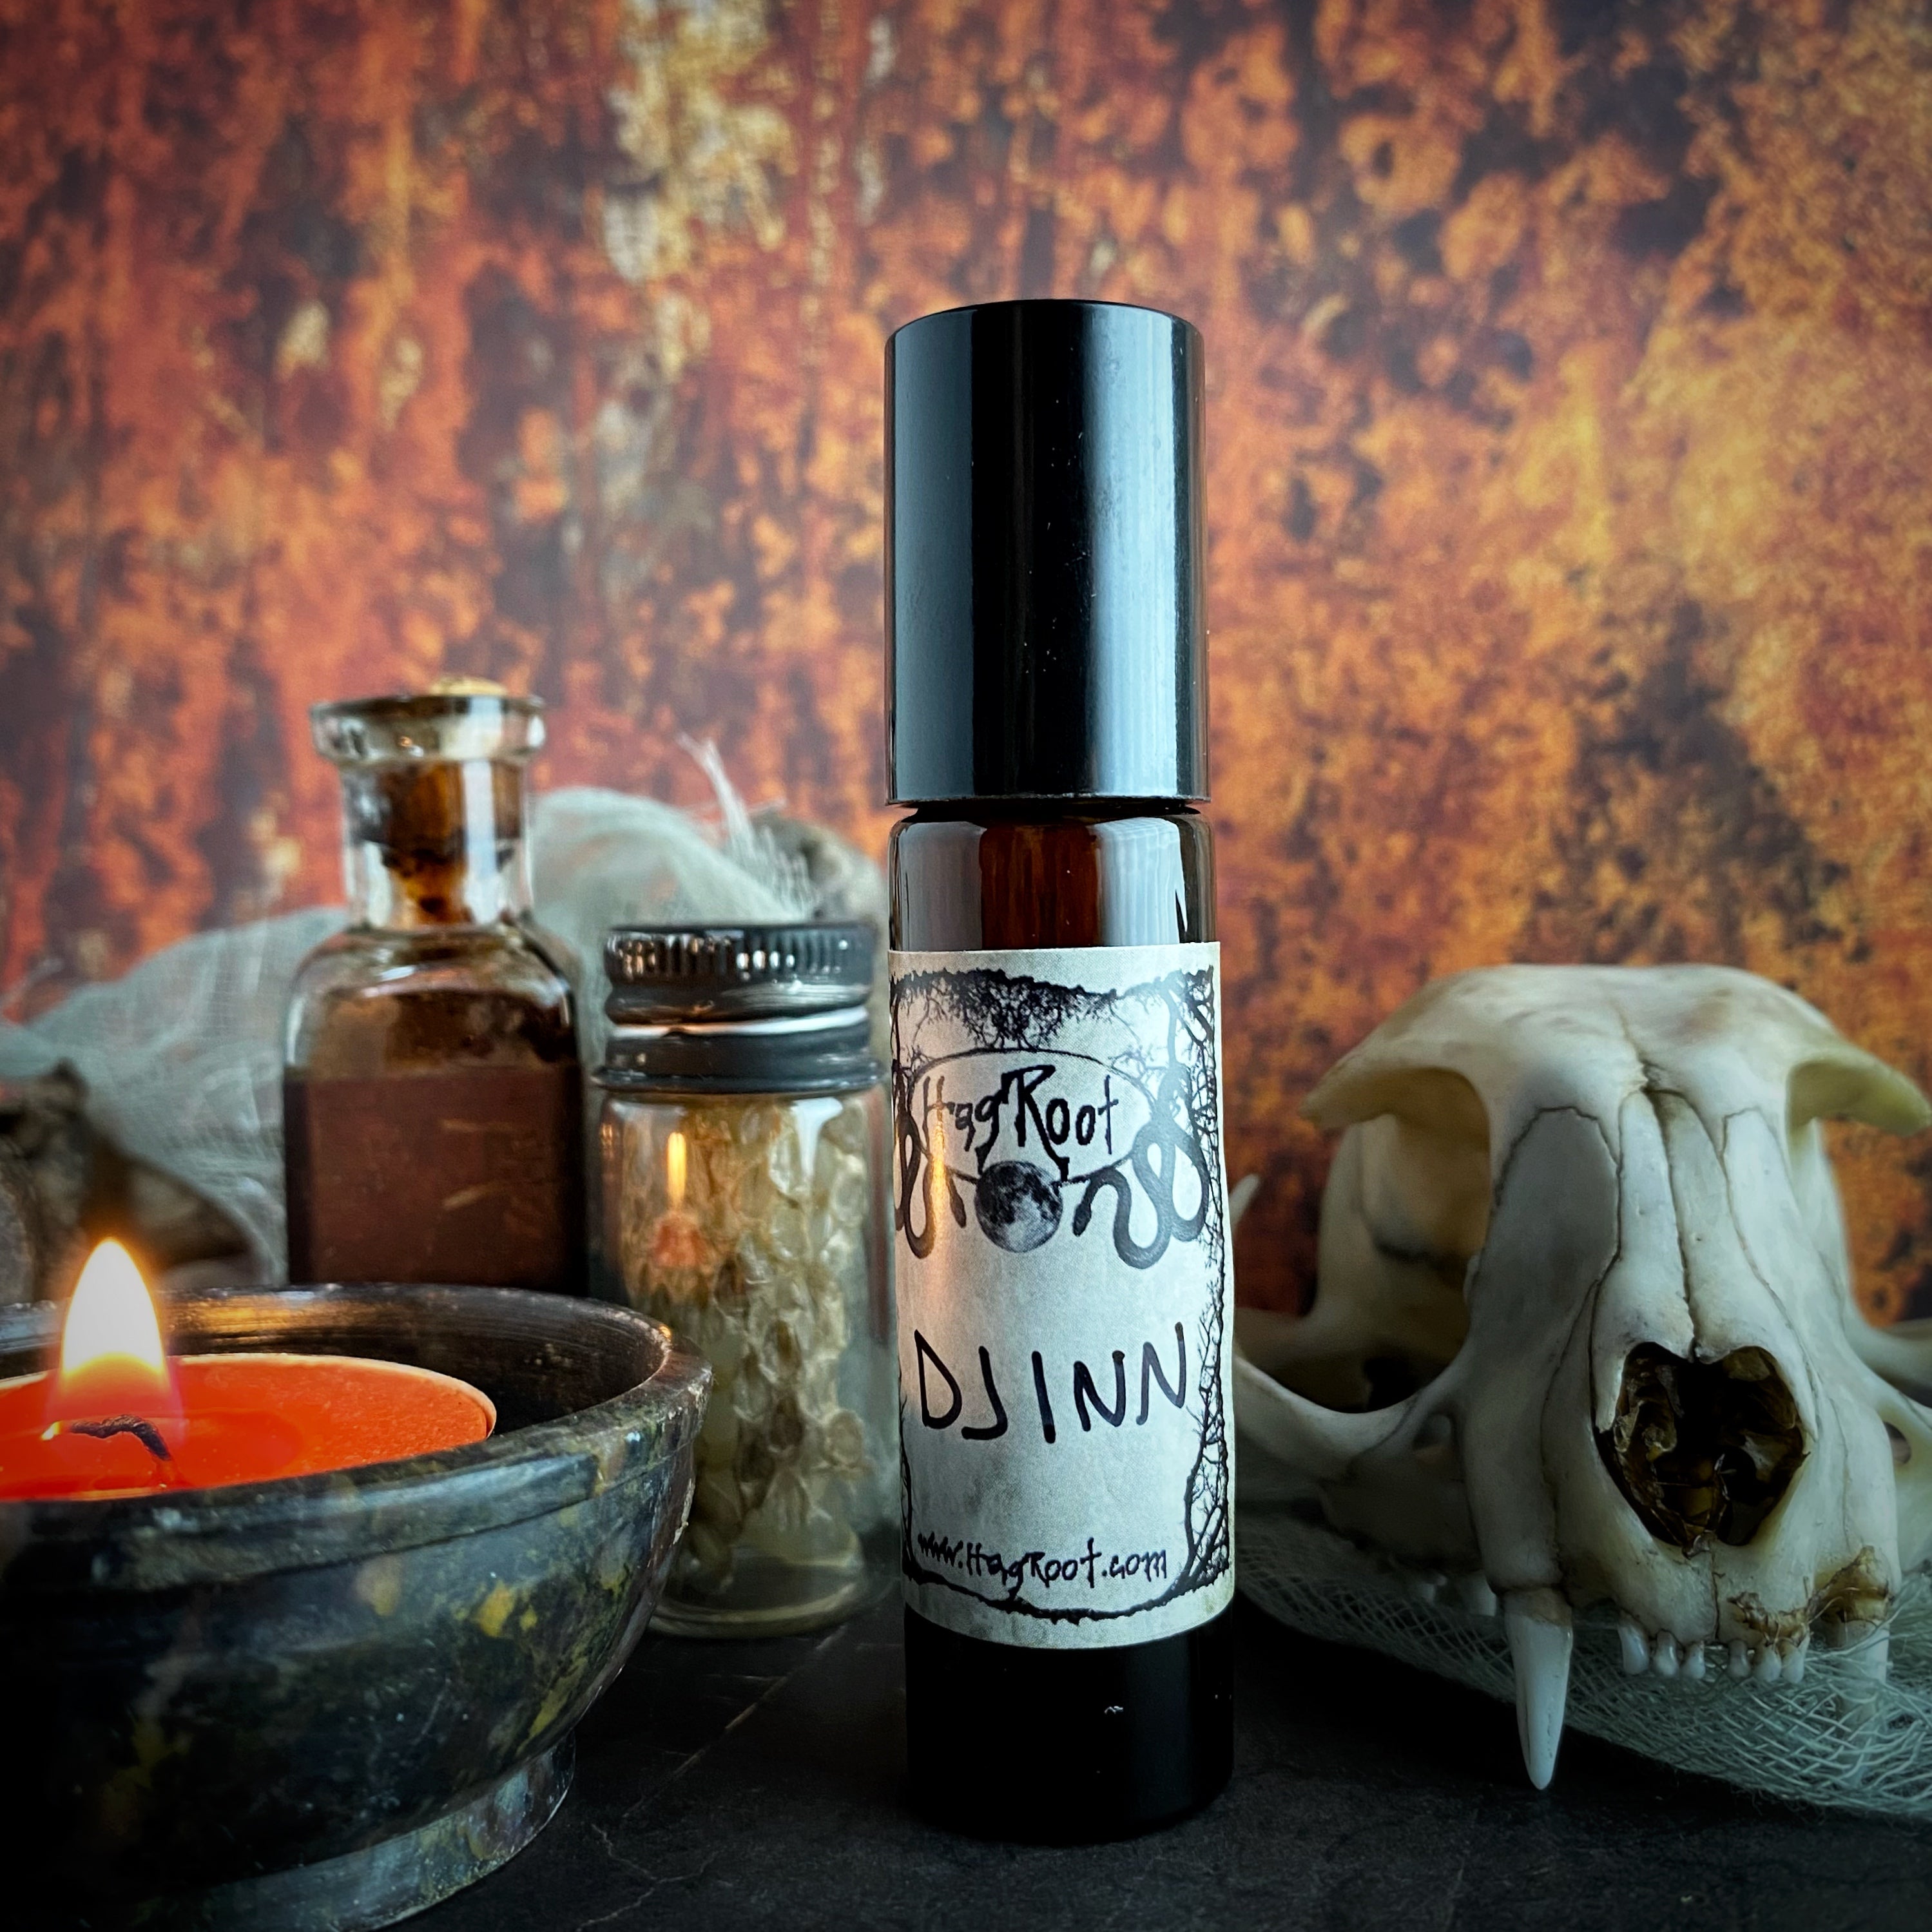 DJINN-(Tobacco, Birch Tar, Musk, Indian Spices, Bay Leaf)-Perfume, Cologne, Anointing, Ritual Oil